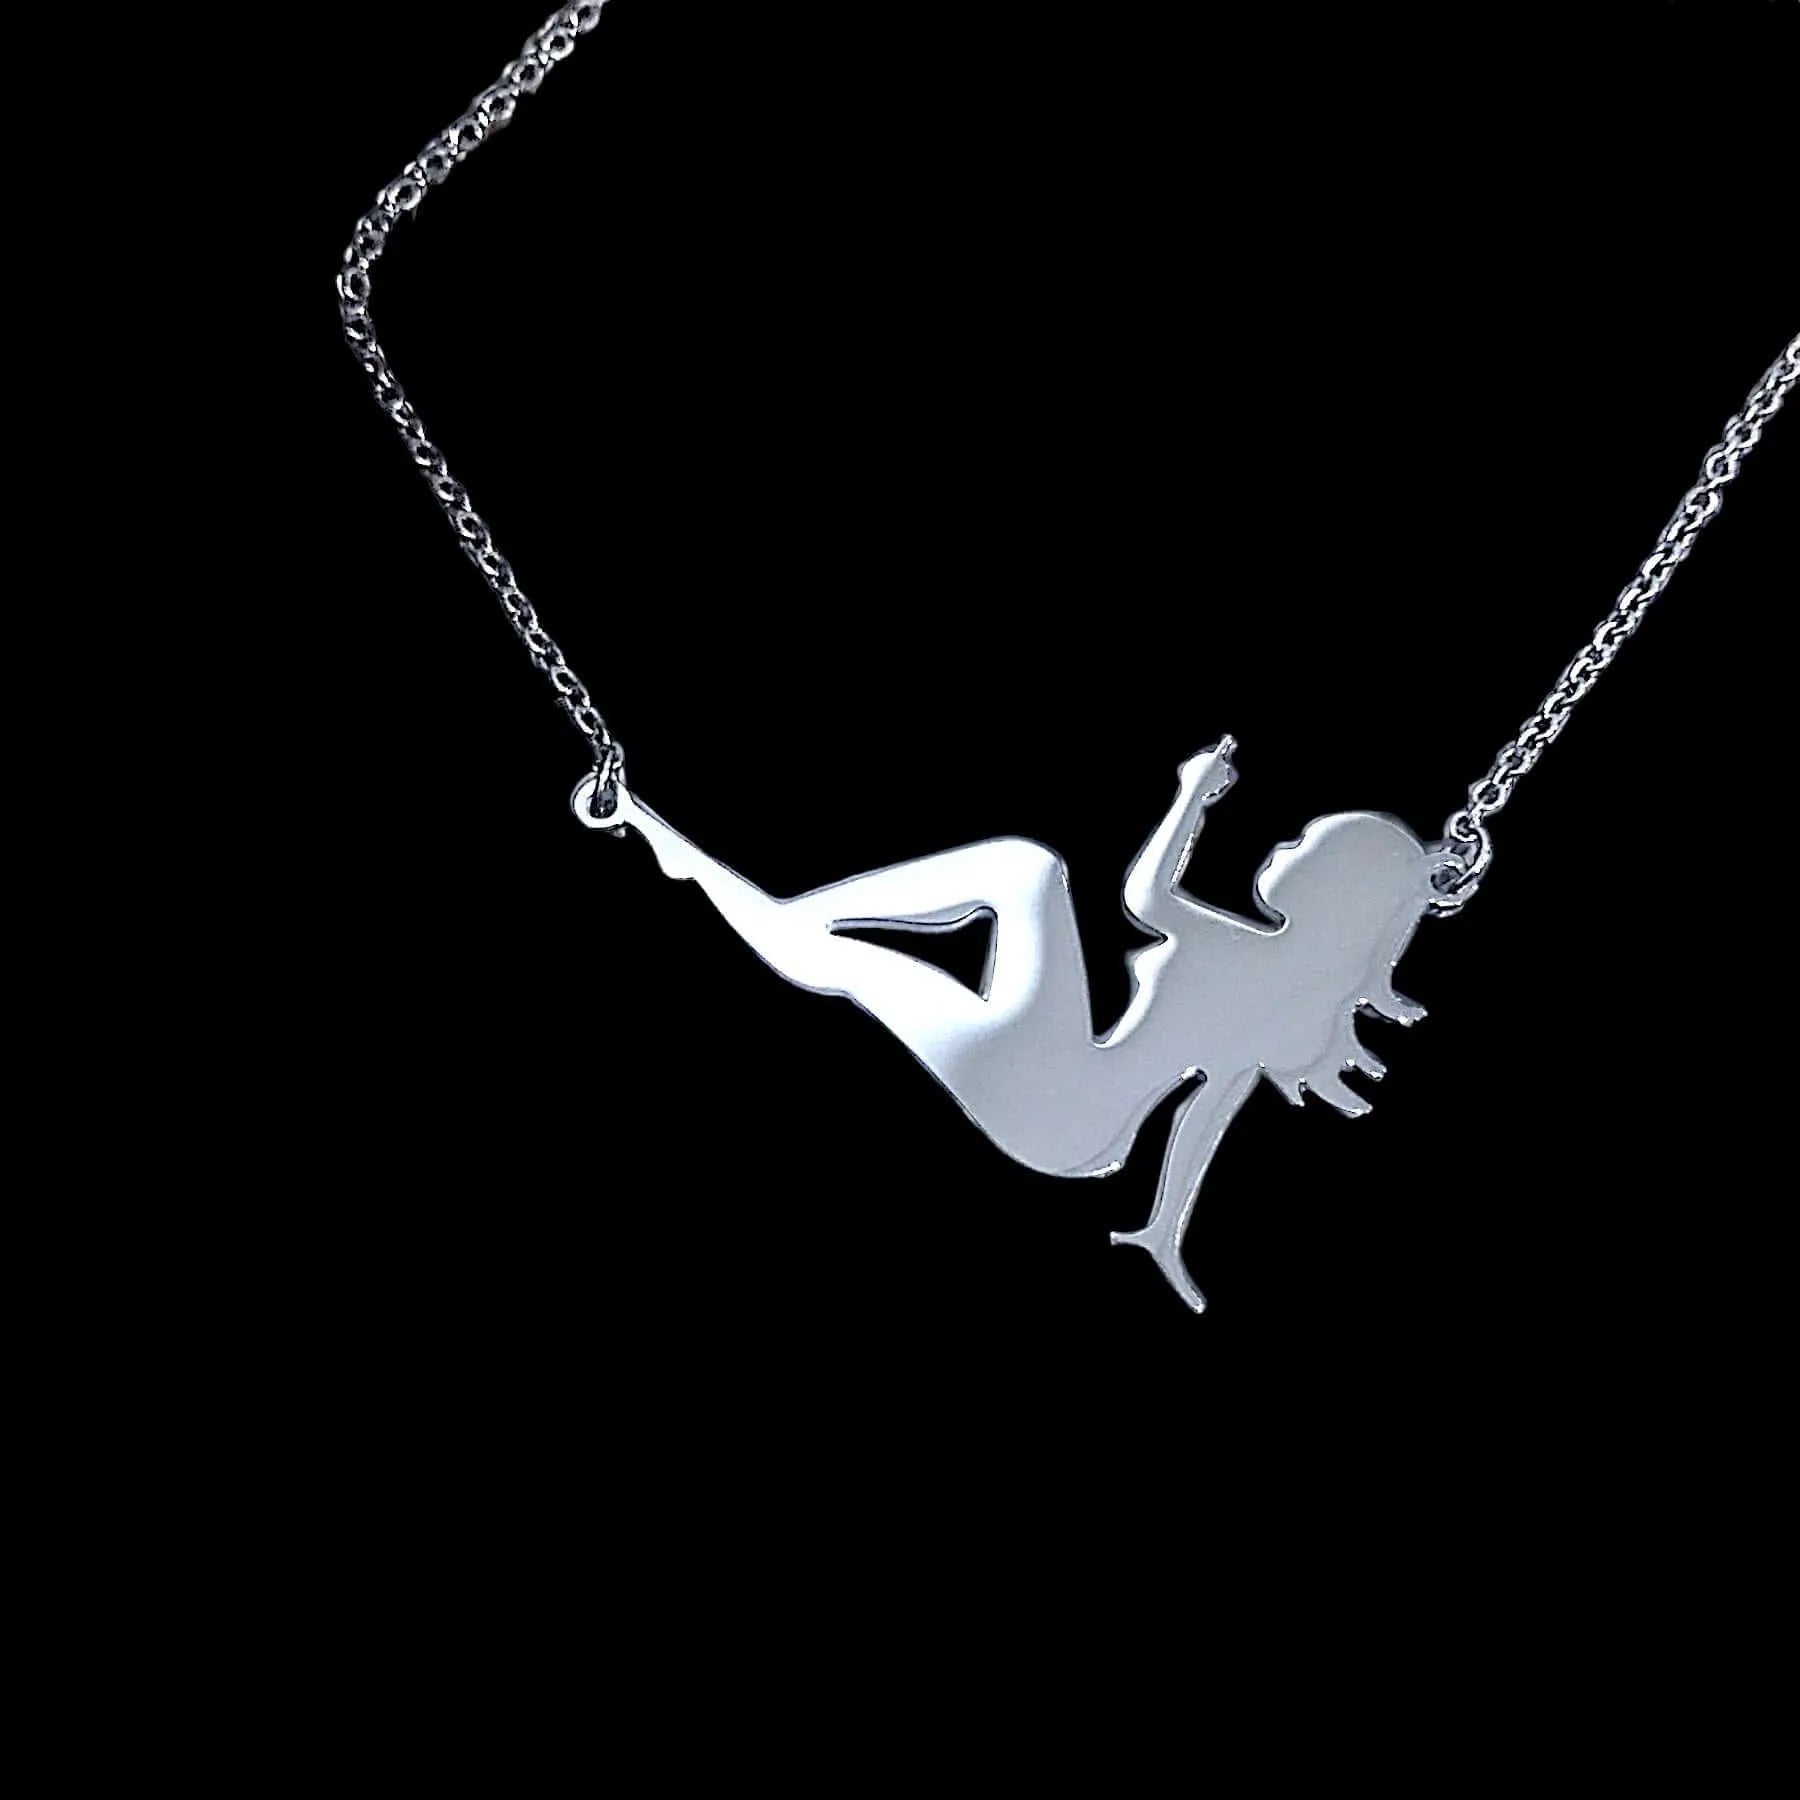 Mudflap pinup girl middle finger feminist necklace pendant women empowerment 